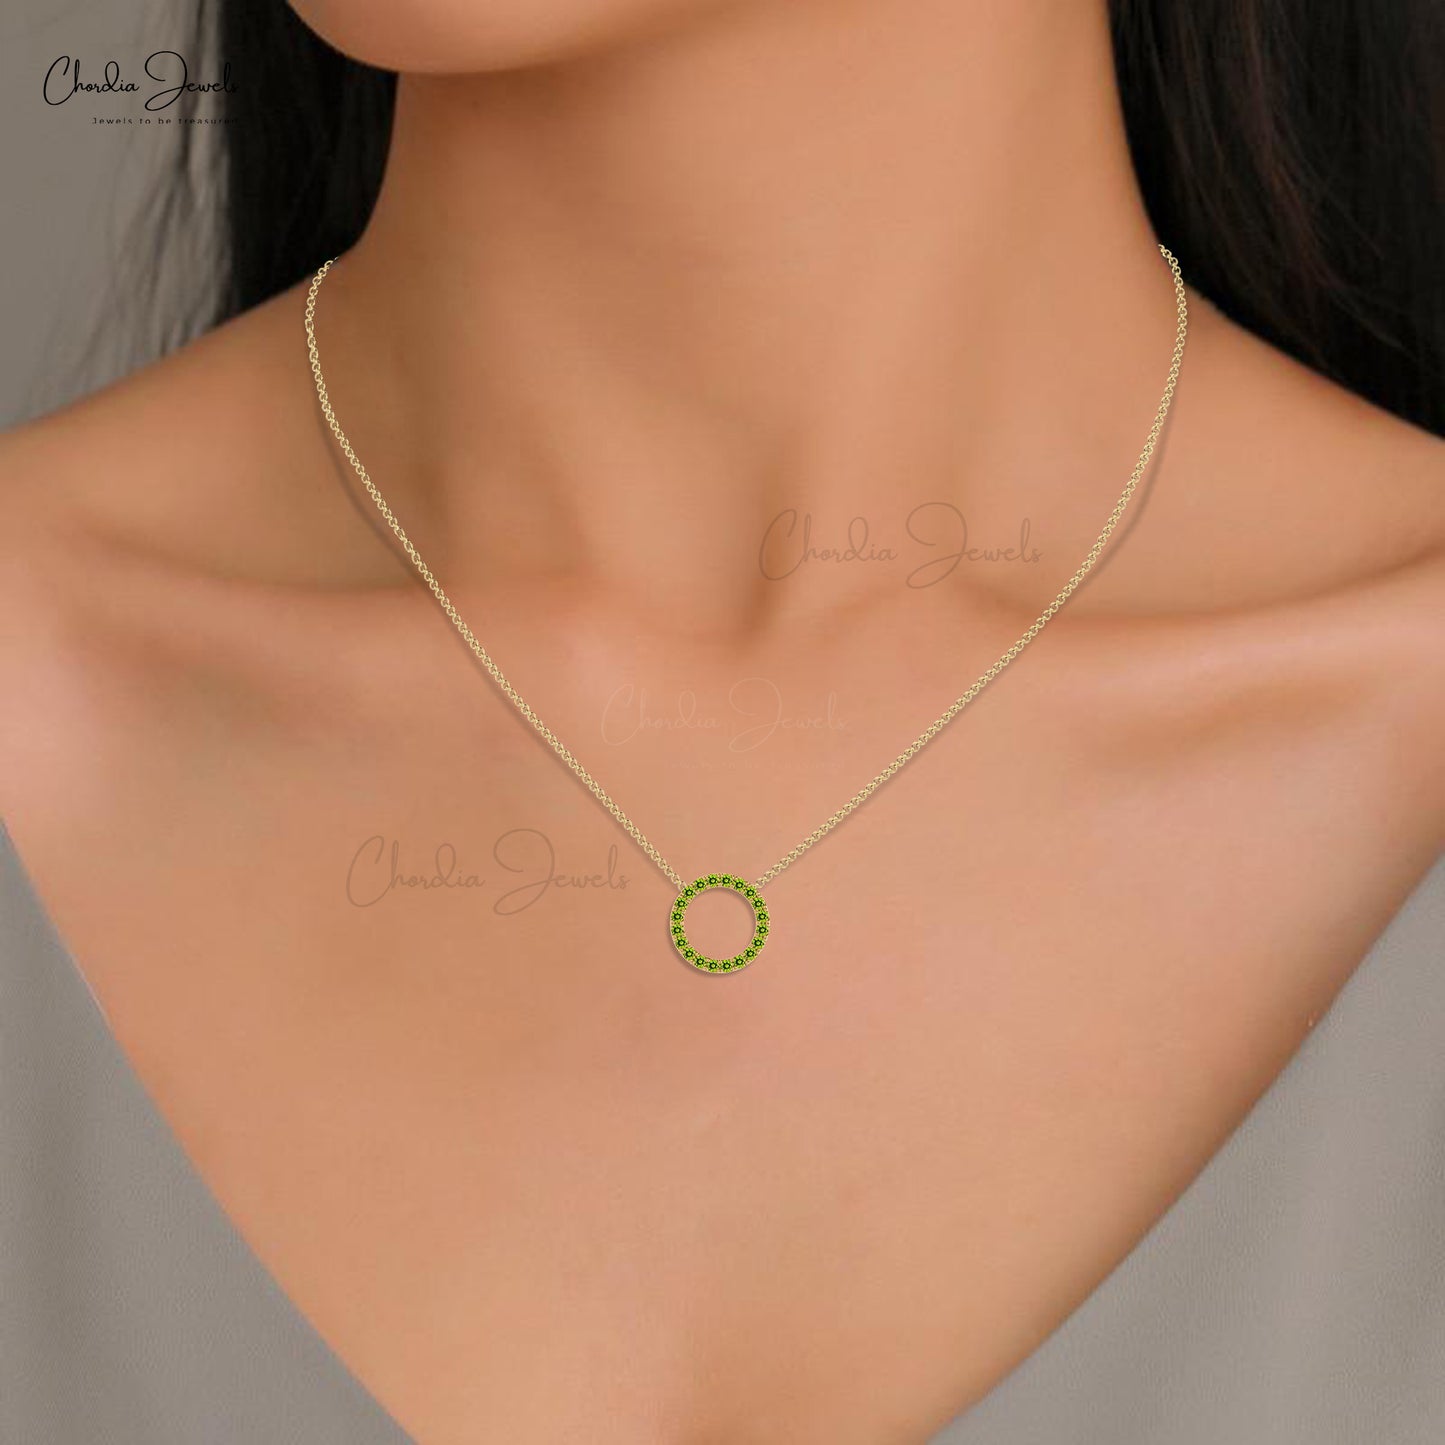 Natural Peridot Pave Set Circle Necklace 14k Real Gold 2mm Brilliant Round Cut Gemstone Dainty Necklace Jewelry For Women's